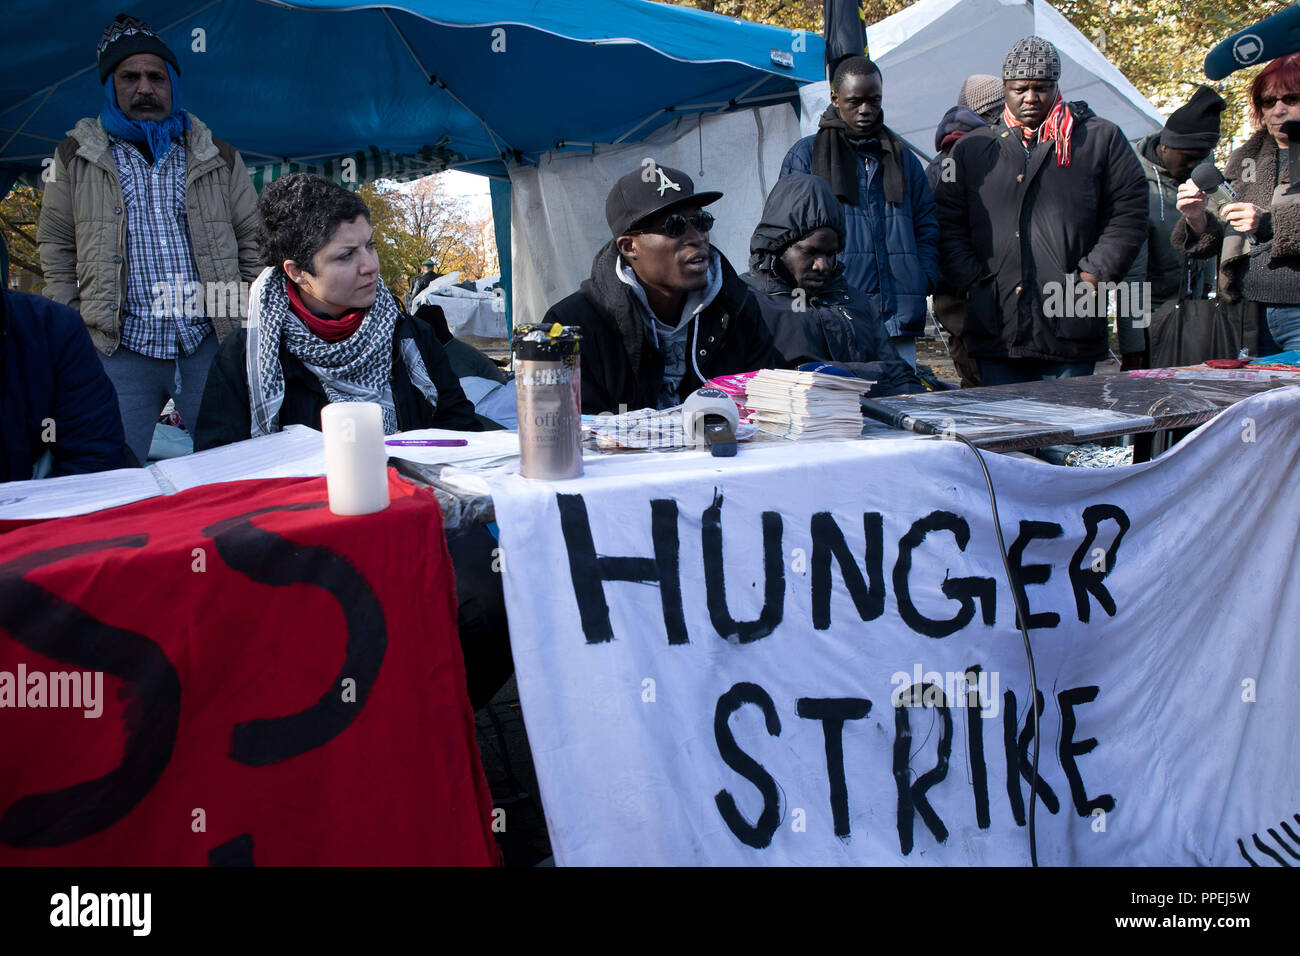 Refugees demonstrate for equality and a 'right to stay for all' with a protest camp and a hunger strike on the Sendlinger-Tor-Platz. The picture shows a press conference with a supporter. Stock Photo